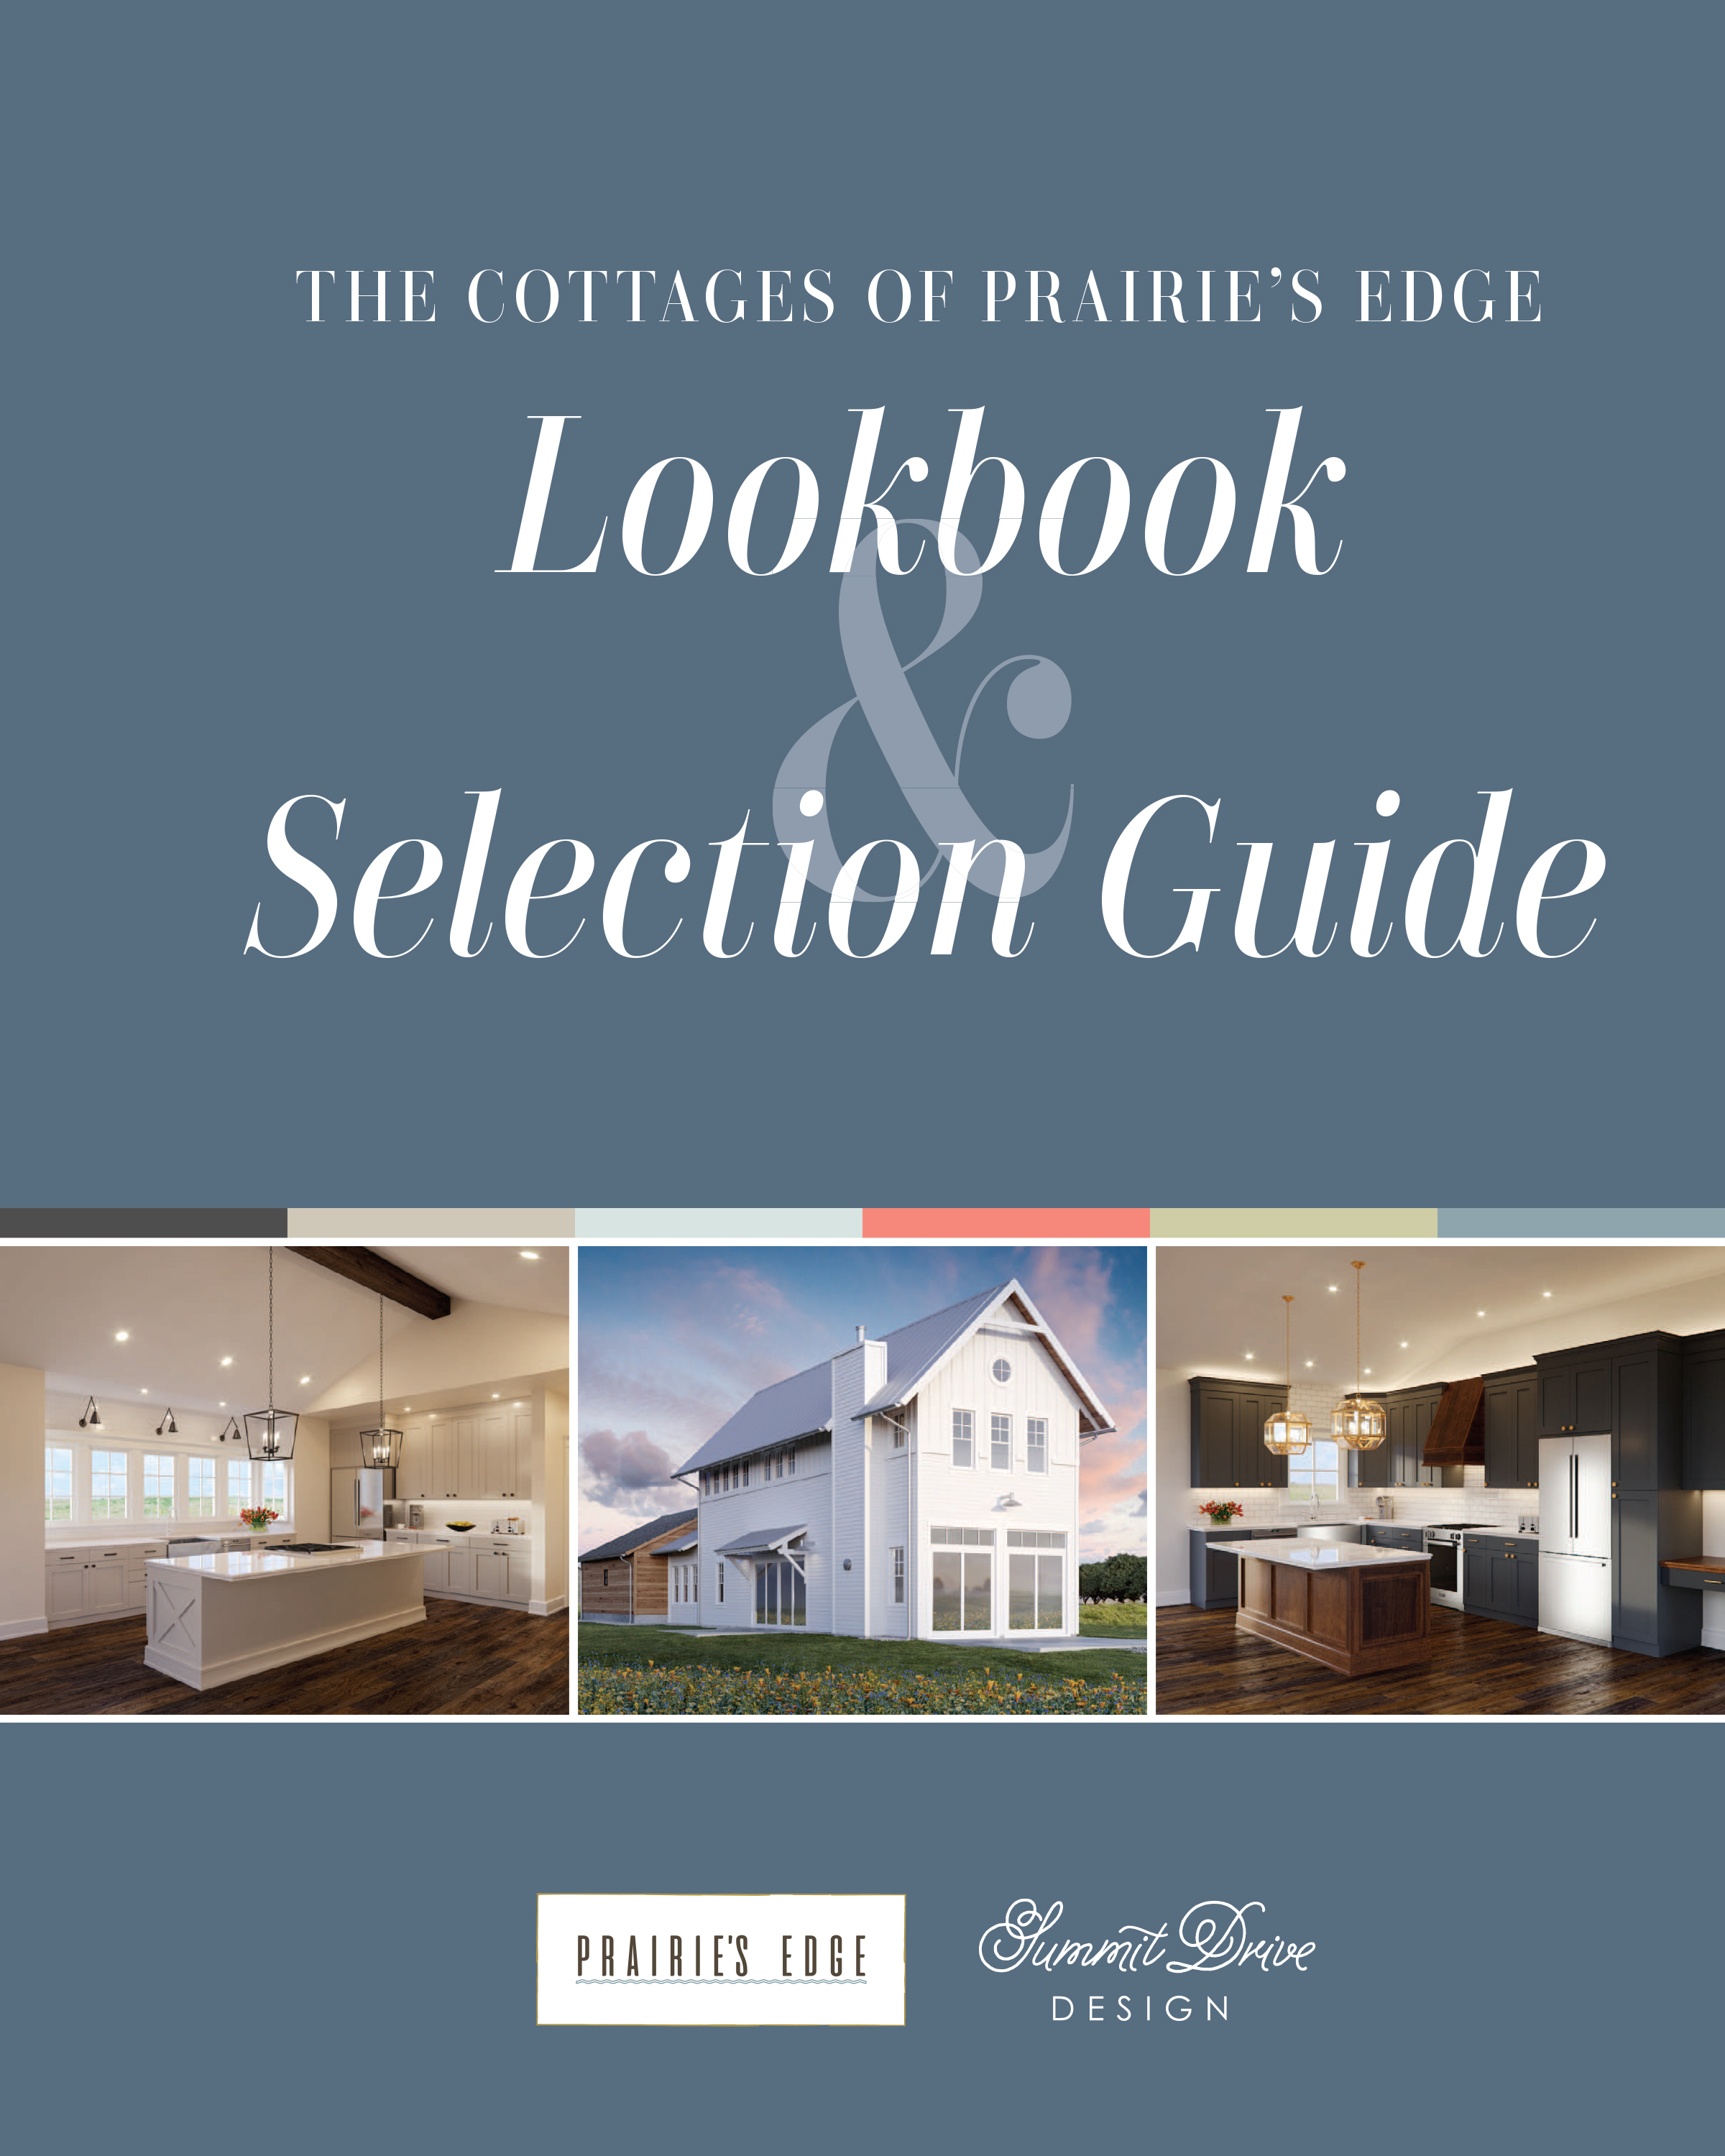 Cottages of Prairie's Edge Lookbook & Selection Guide.jpg